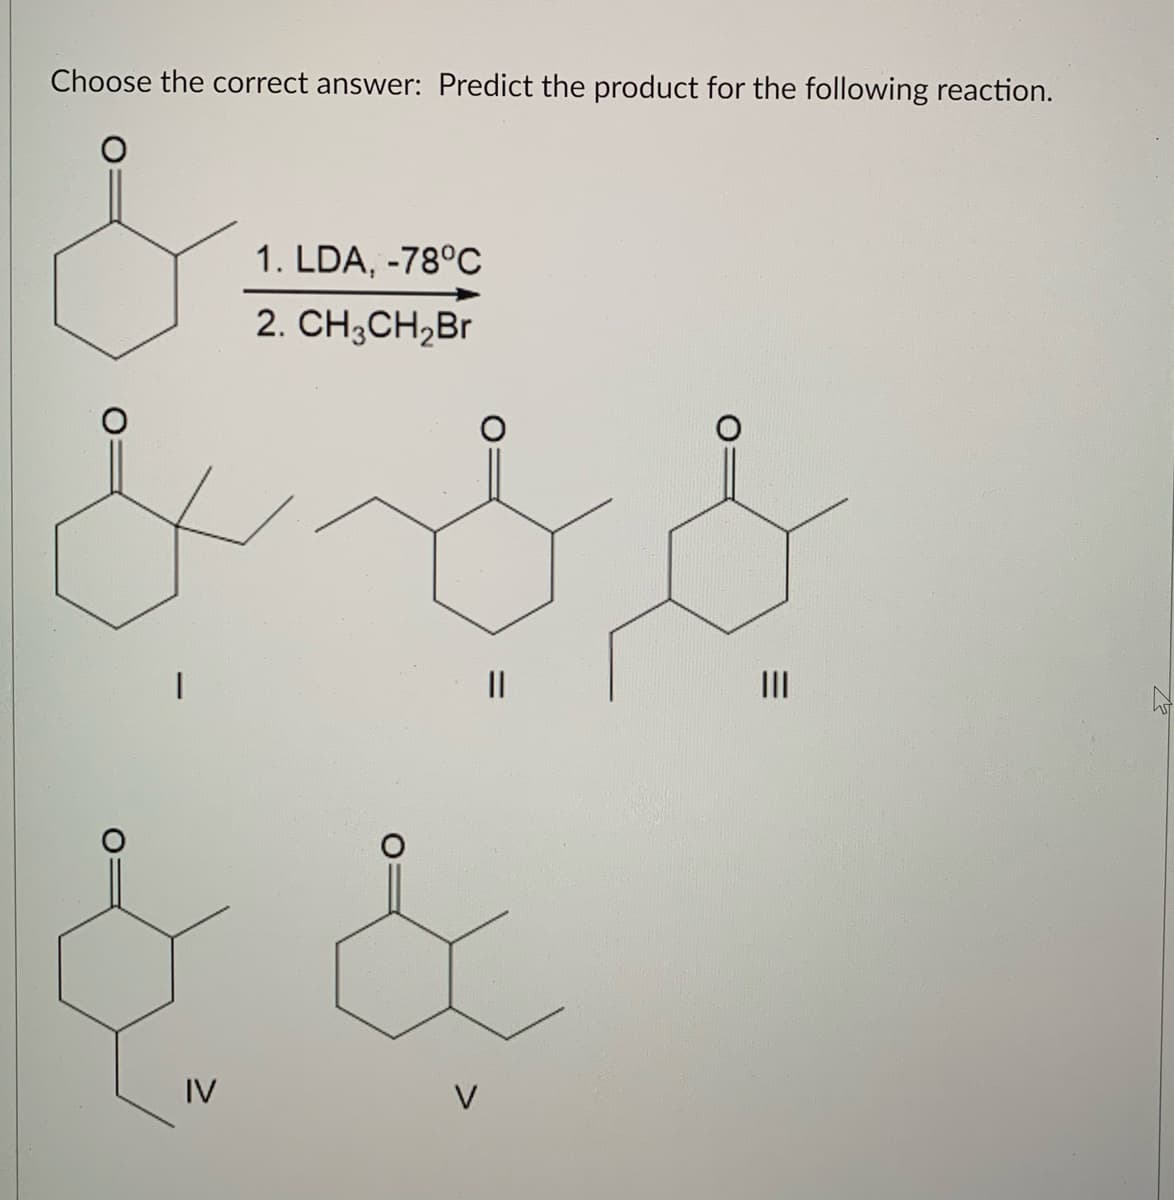 Choose the correct answer: Predict the product for the following reaction.
1. LDA, -78°C
2. CH,CH,Br
II
IV
V
